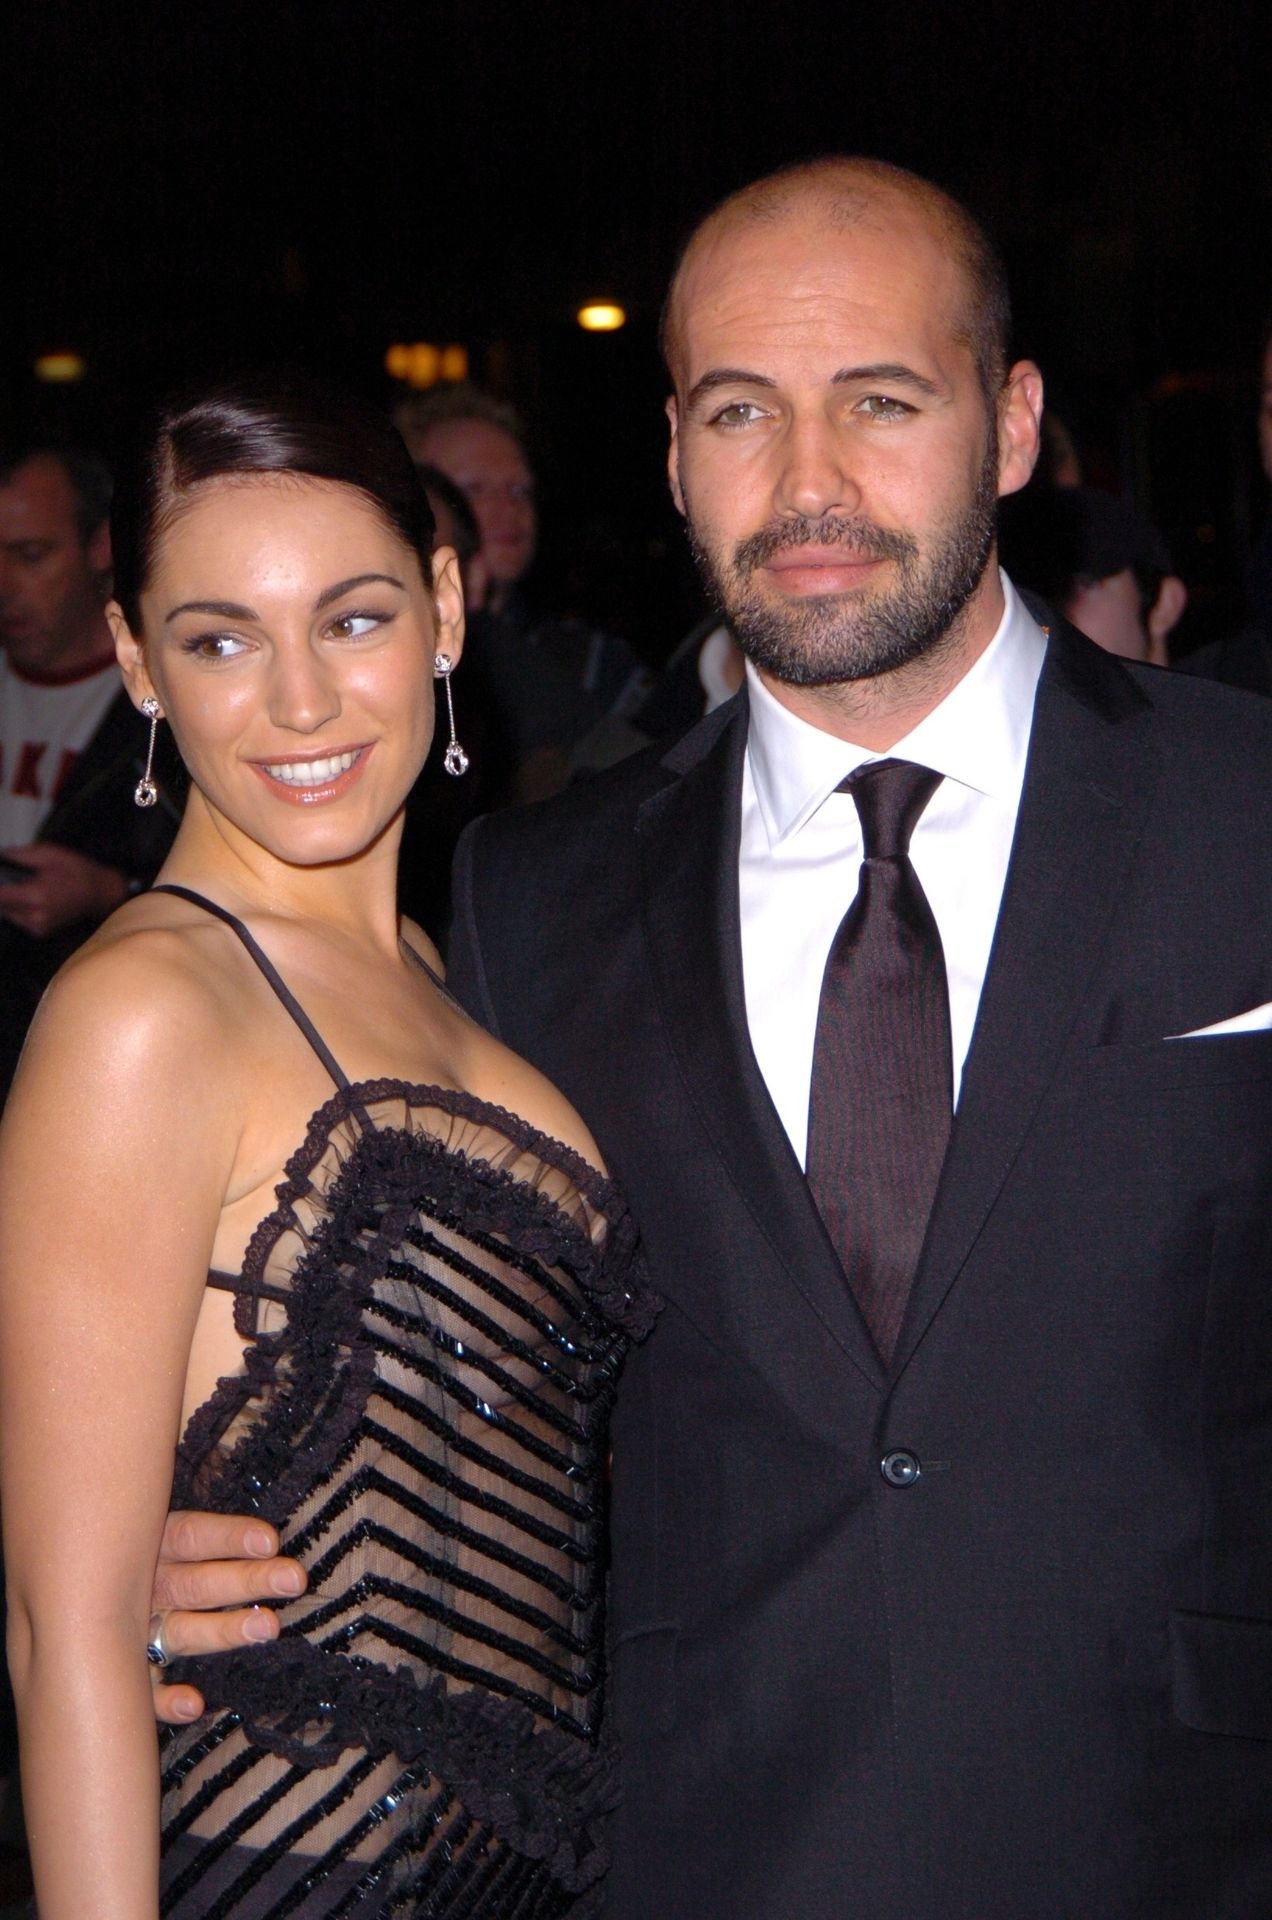 Kelly Brook & Billy Zane Arrive at The 2004 British Independent Film Awards (36 Photos)